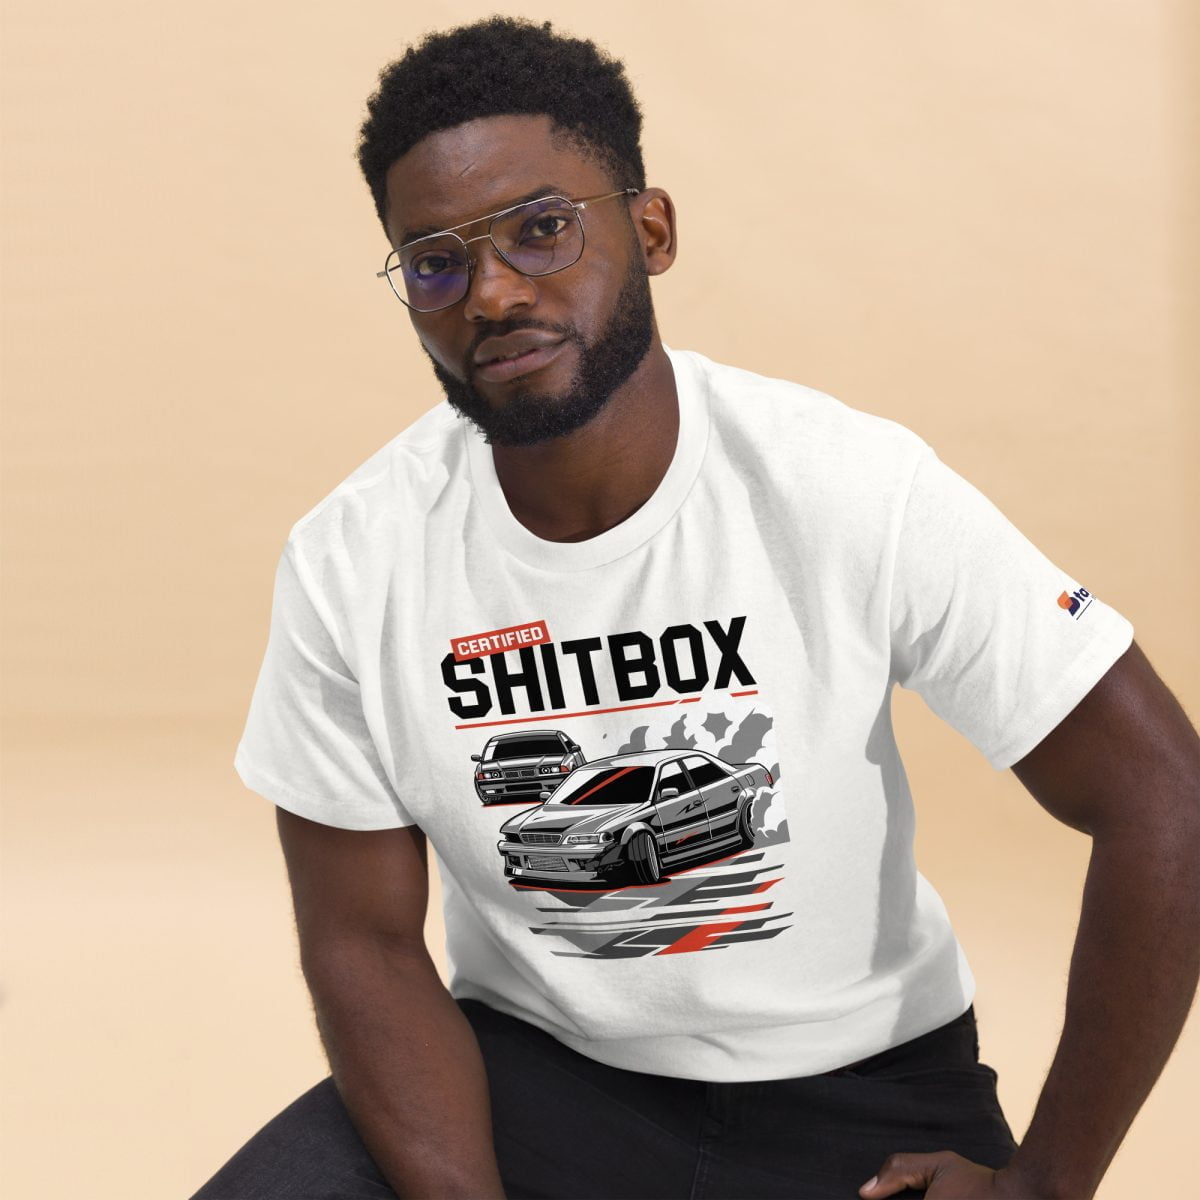 A man wearing a white t shirt with the product name E36 BMW JDM JZX100 Toyota Chaser Drifting Mens T shirt Certified Shitbox printed boldly showcasing his love for drifting and JDM cars | StancedLife